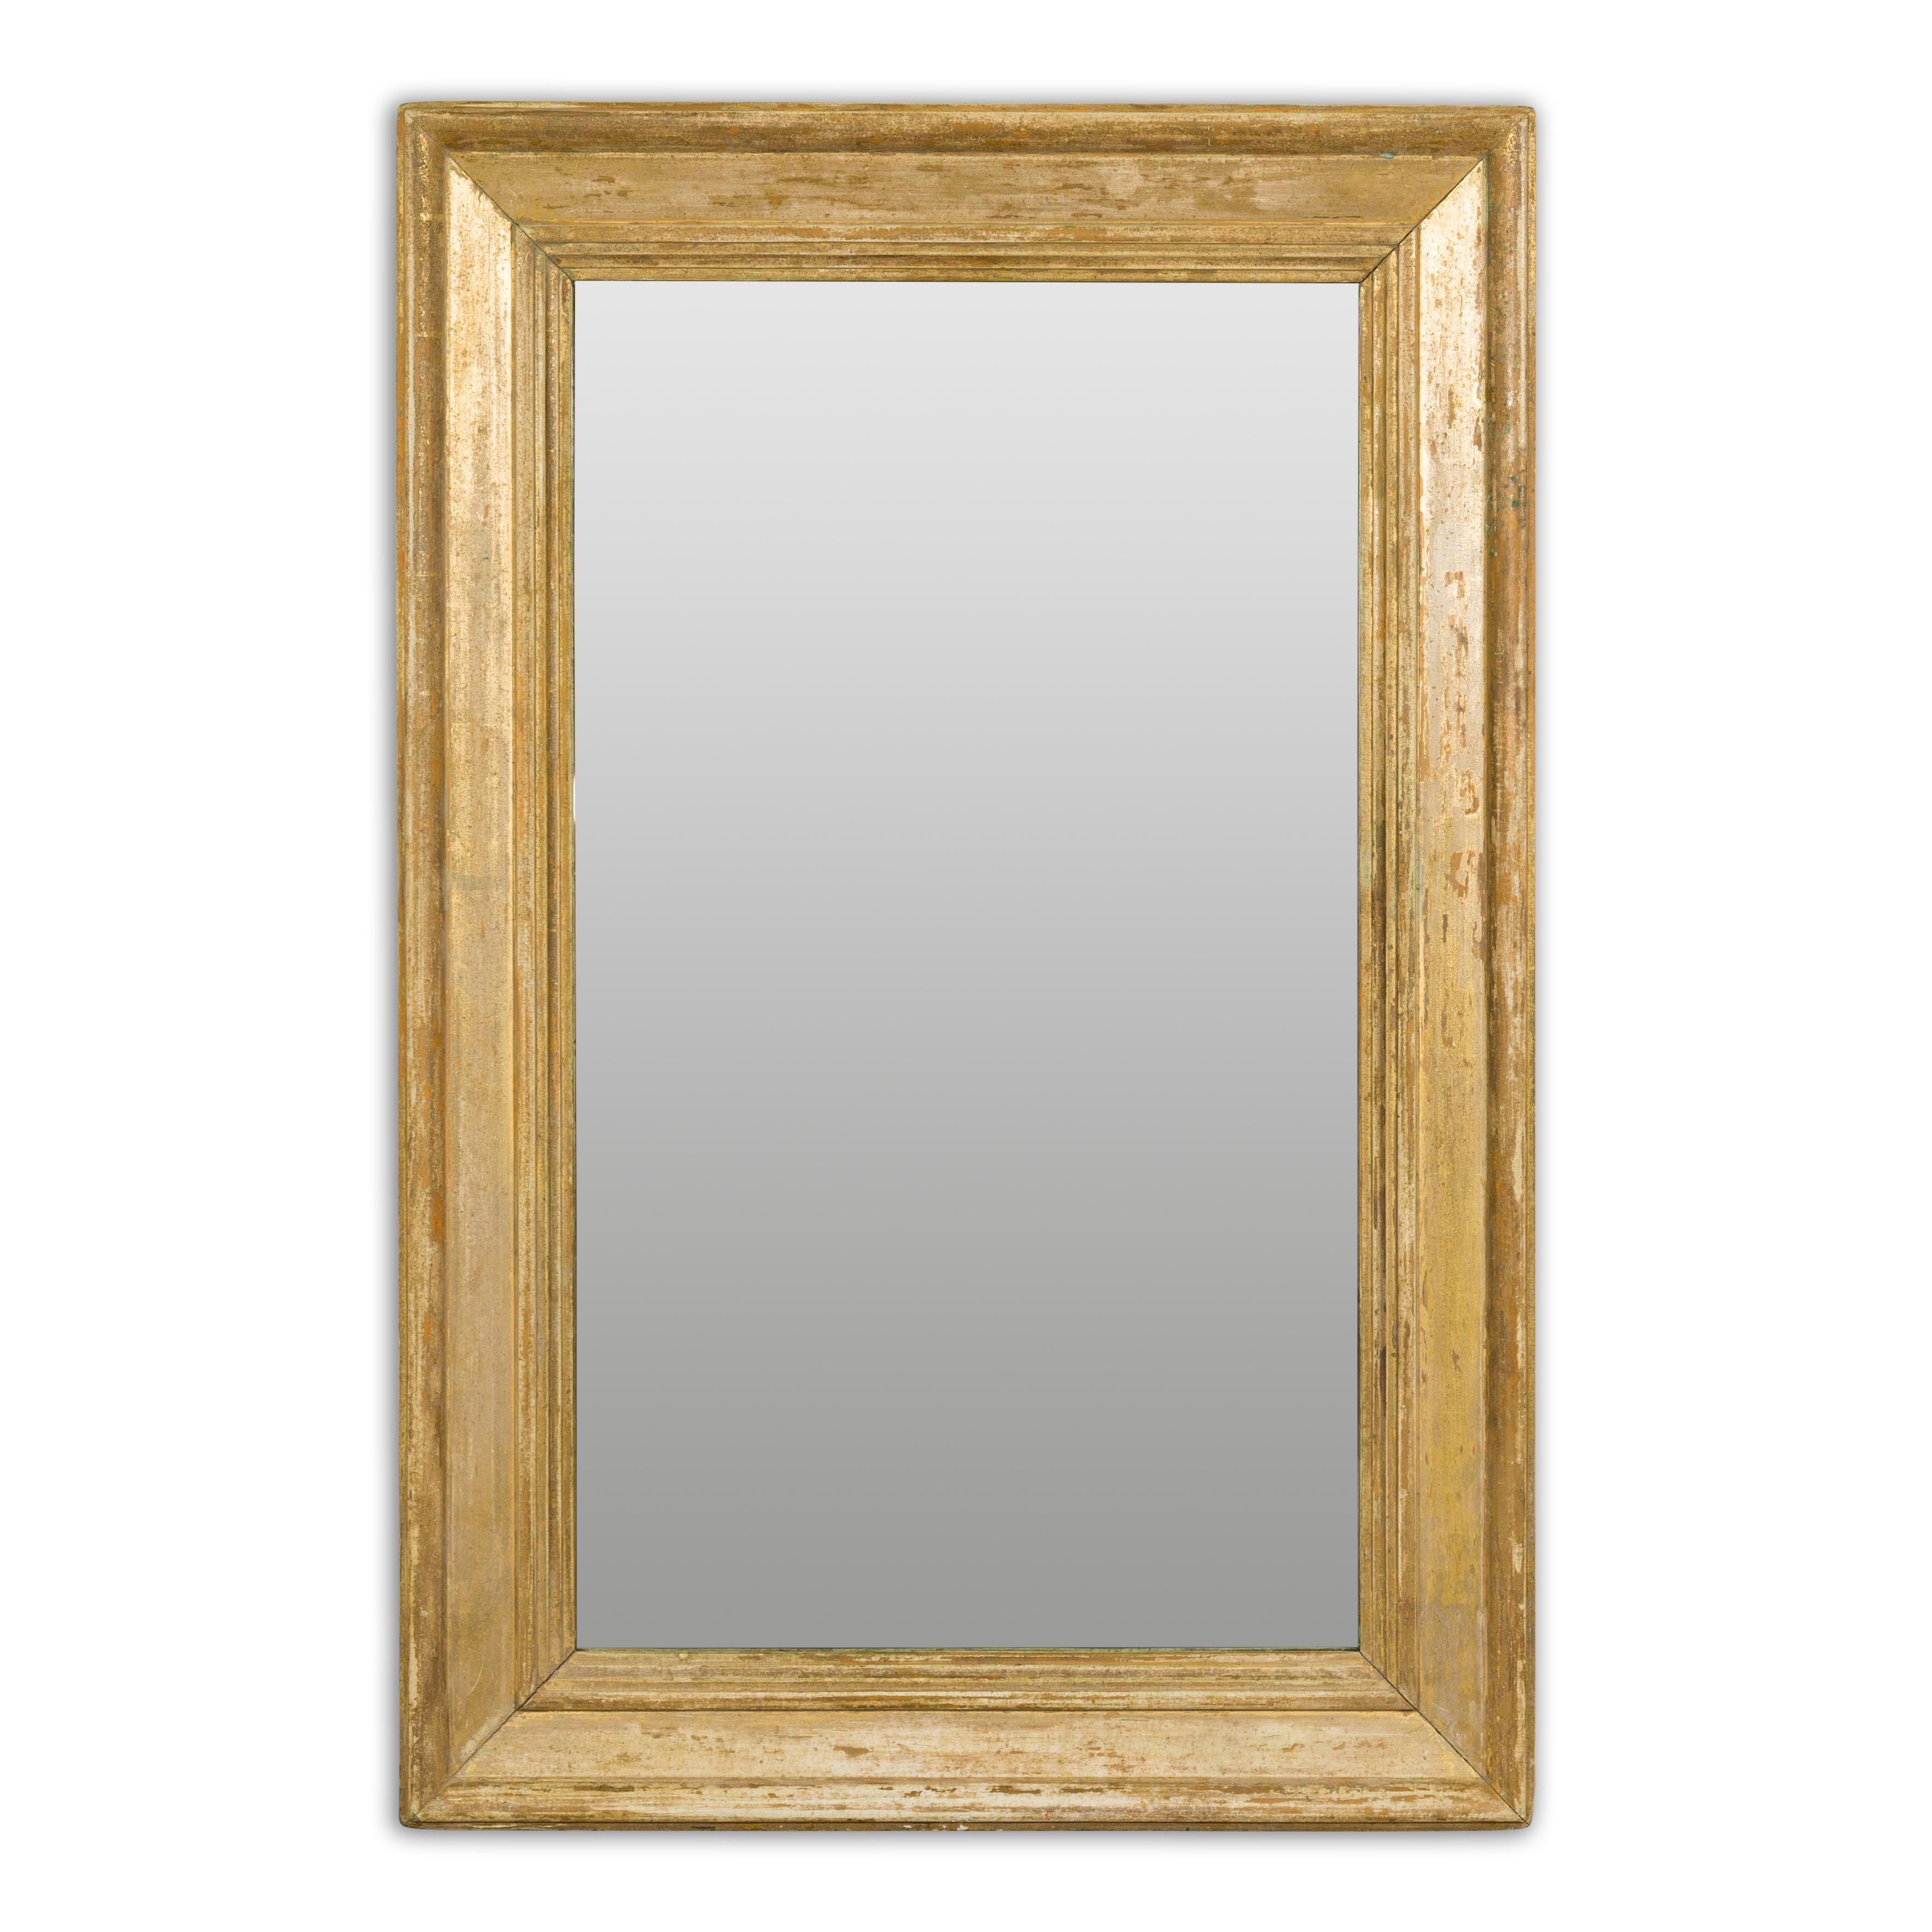 A French rectangular mirror from the 19th century painted with distressed golden tones and with molded accents. Embodying the refined elegance of 19th-century French design, this rectangular mirror is a testament to timeless sophistication. Crafted